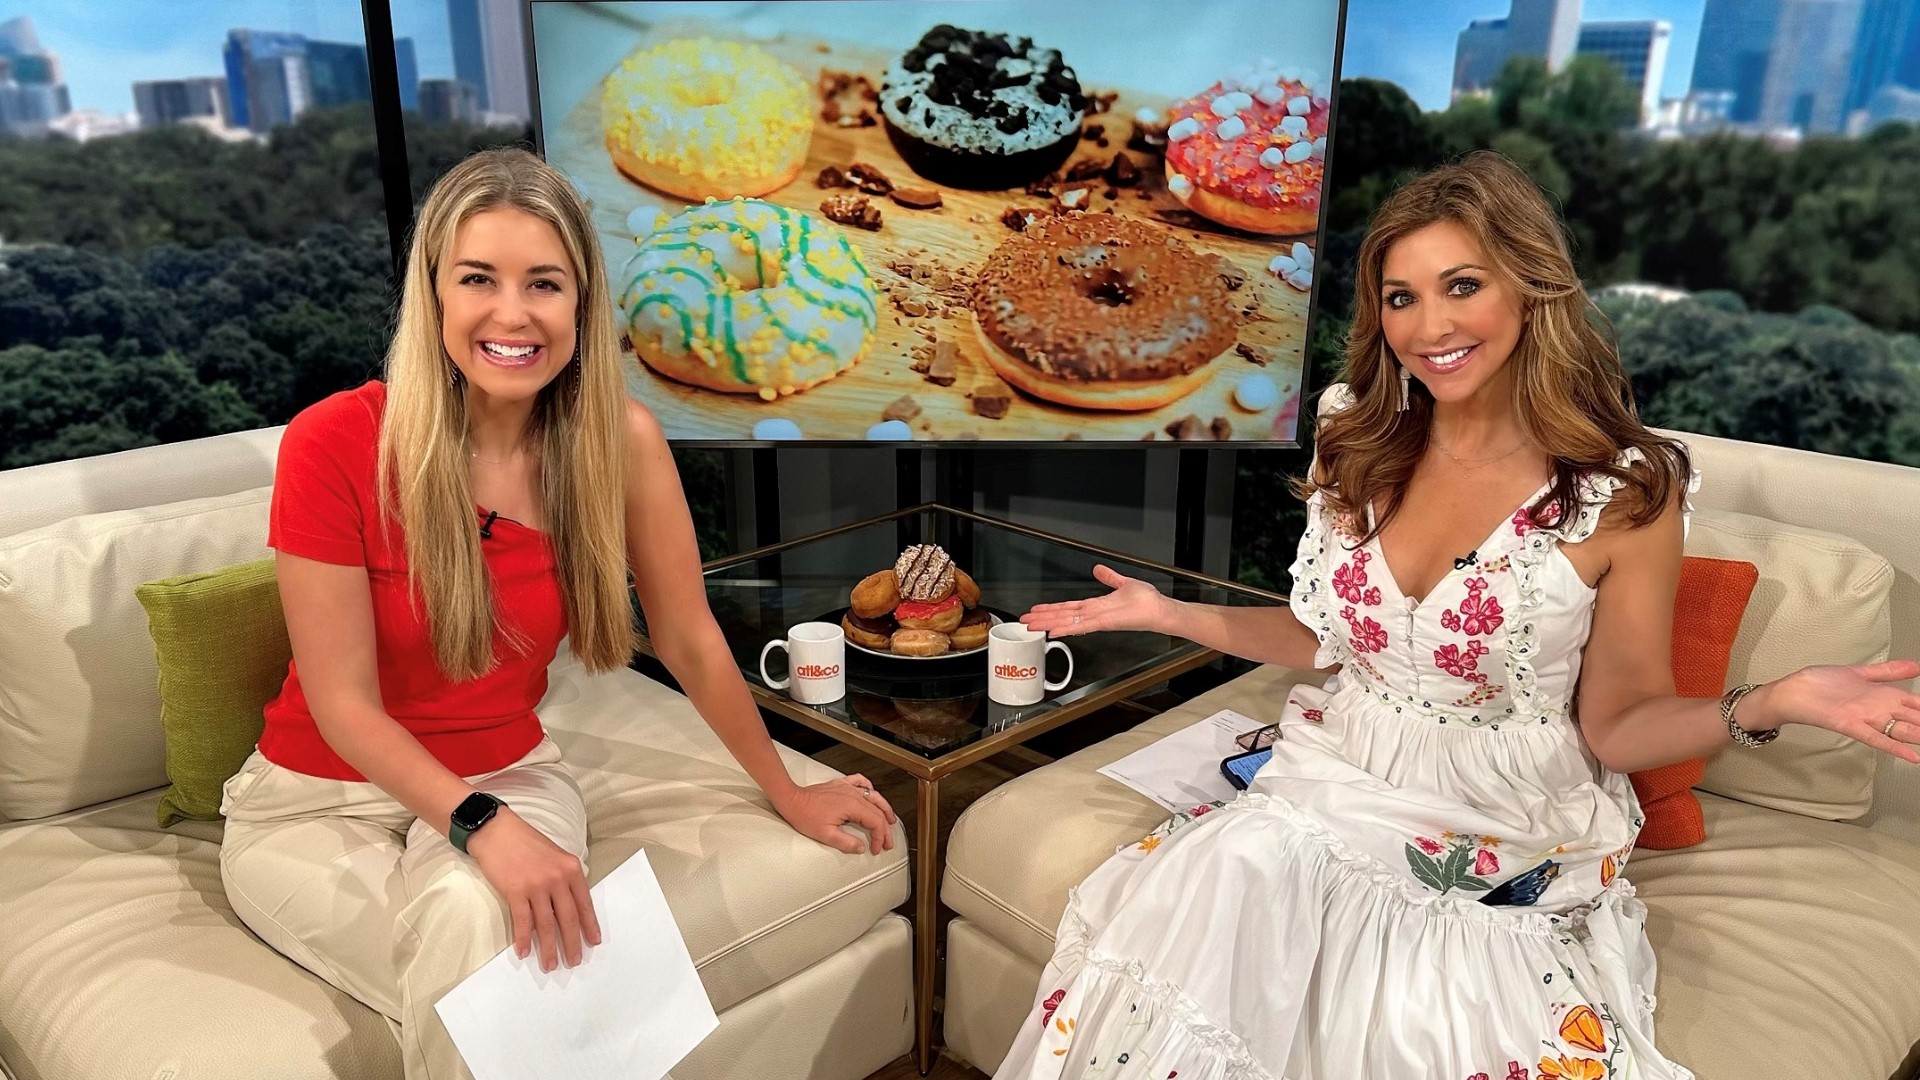 Christine and Cara celebrate National Doughnut Day and share 'It's All Good' stories.